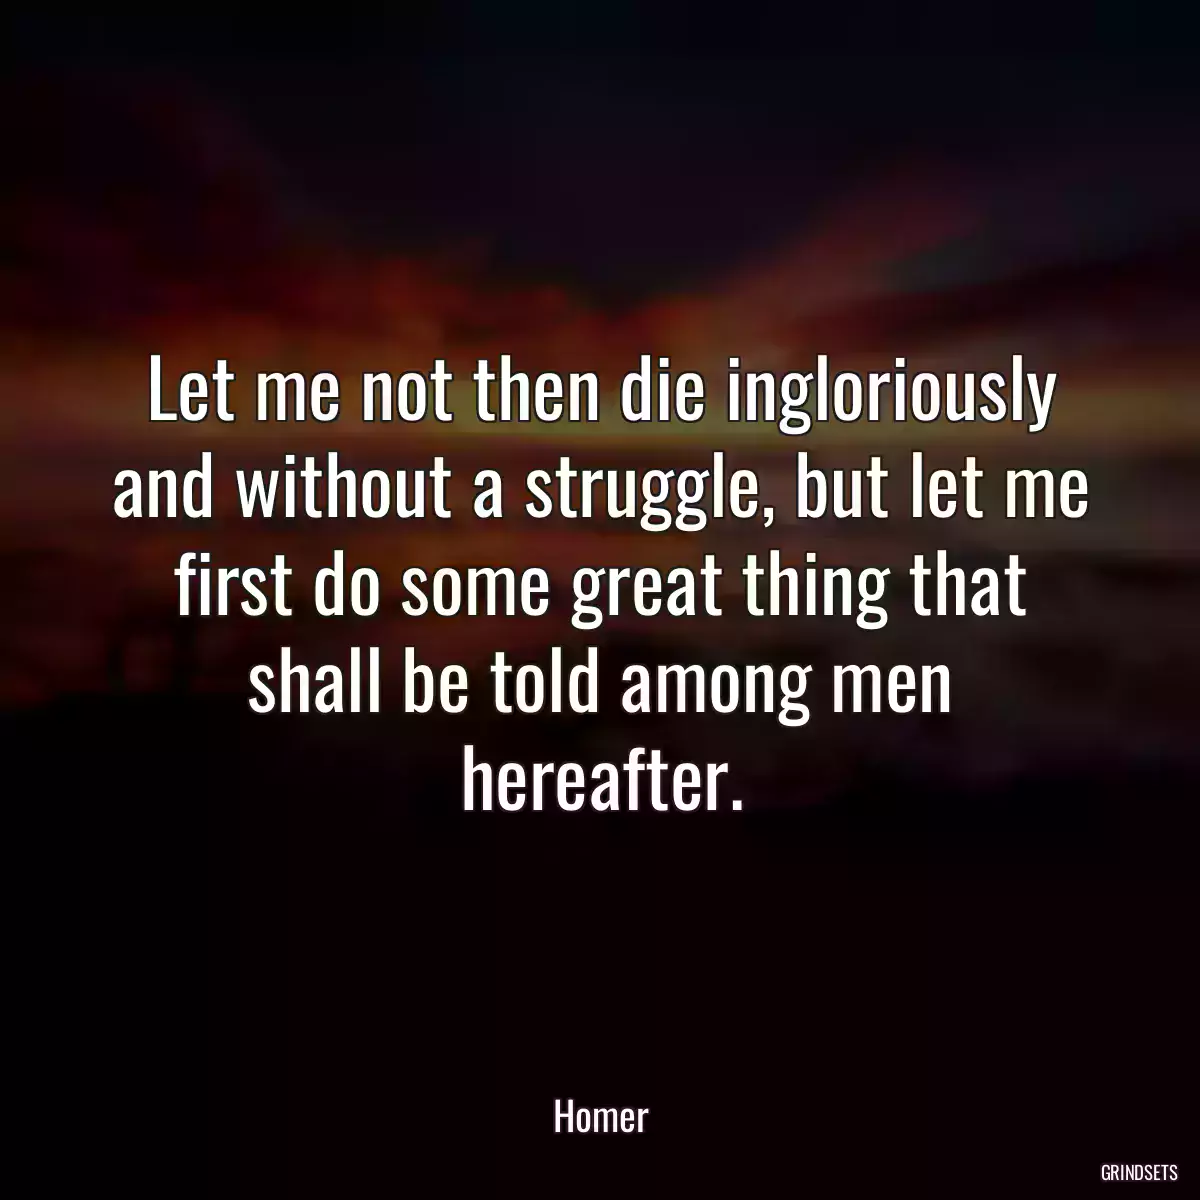 Let me not then die ingloriously and without a struggle, but let me first do some great thing that shall be told among men hereafter.